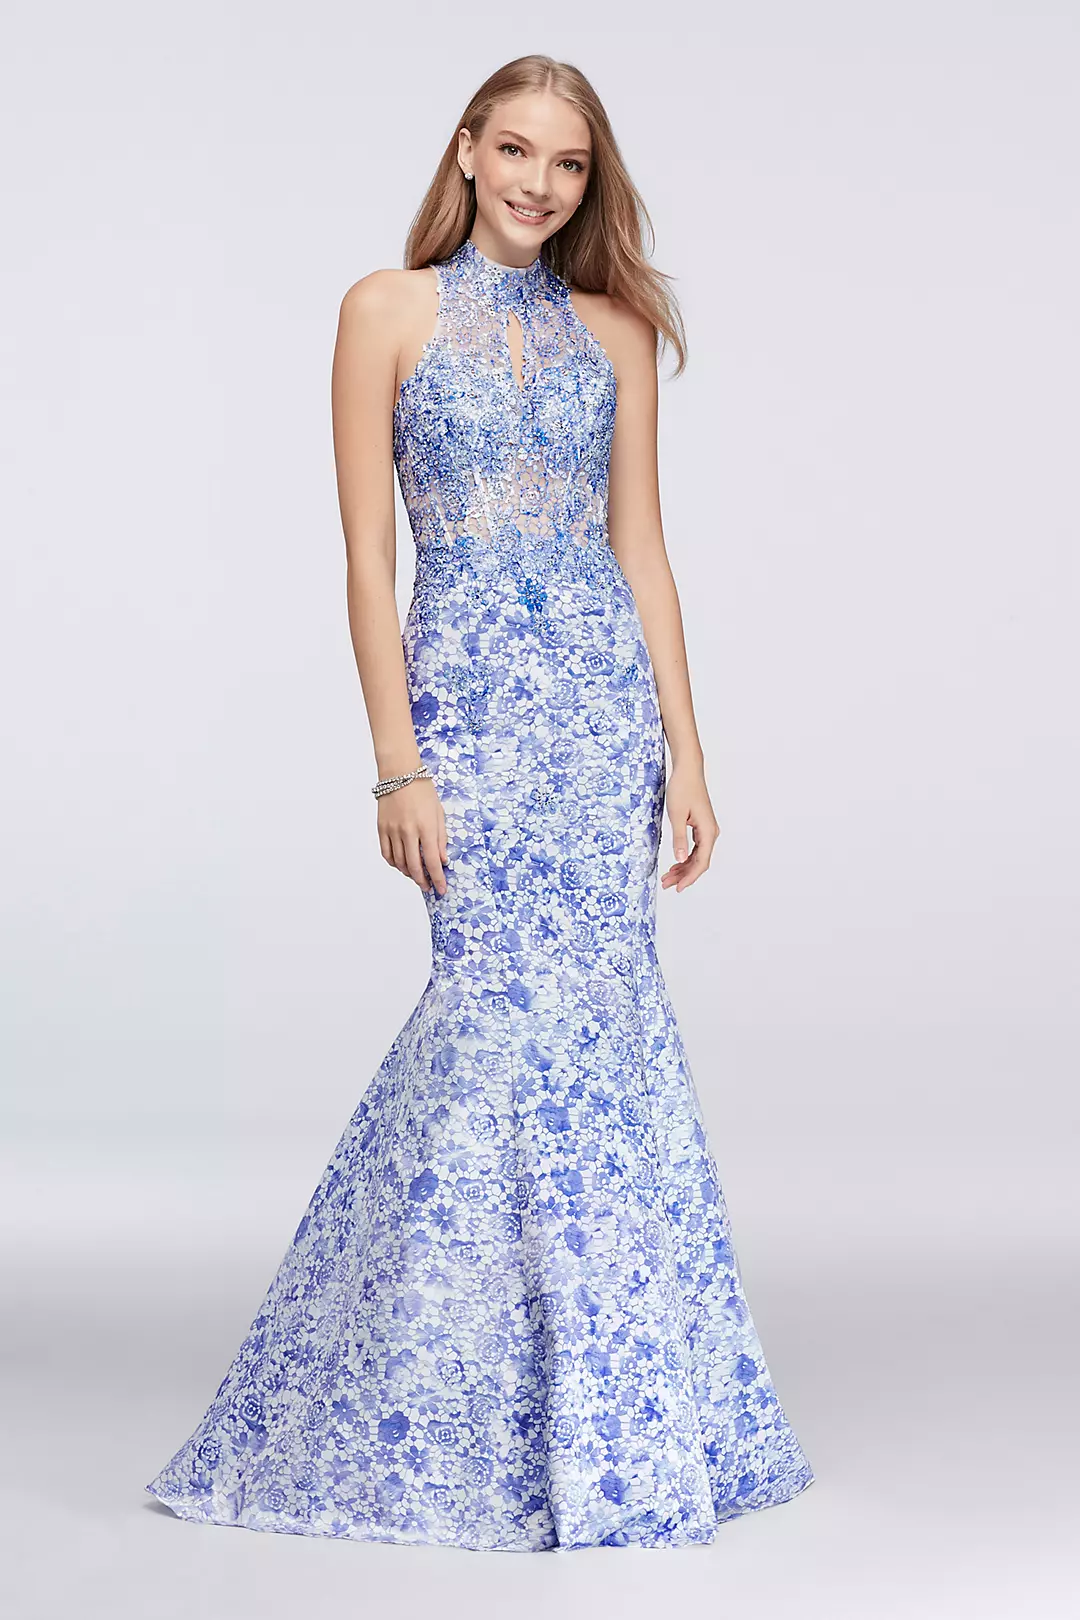 Lace-Print Mermaid Dress with Beaded Appliques Image